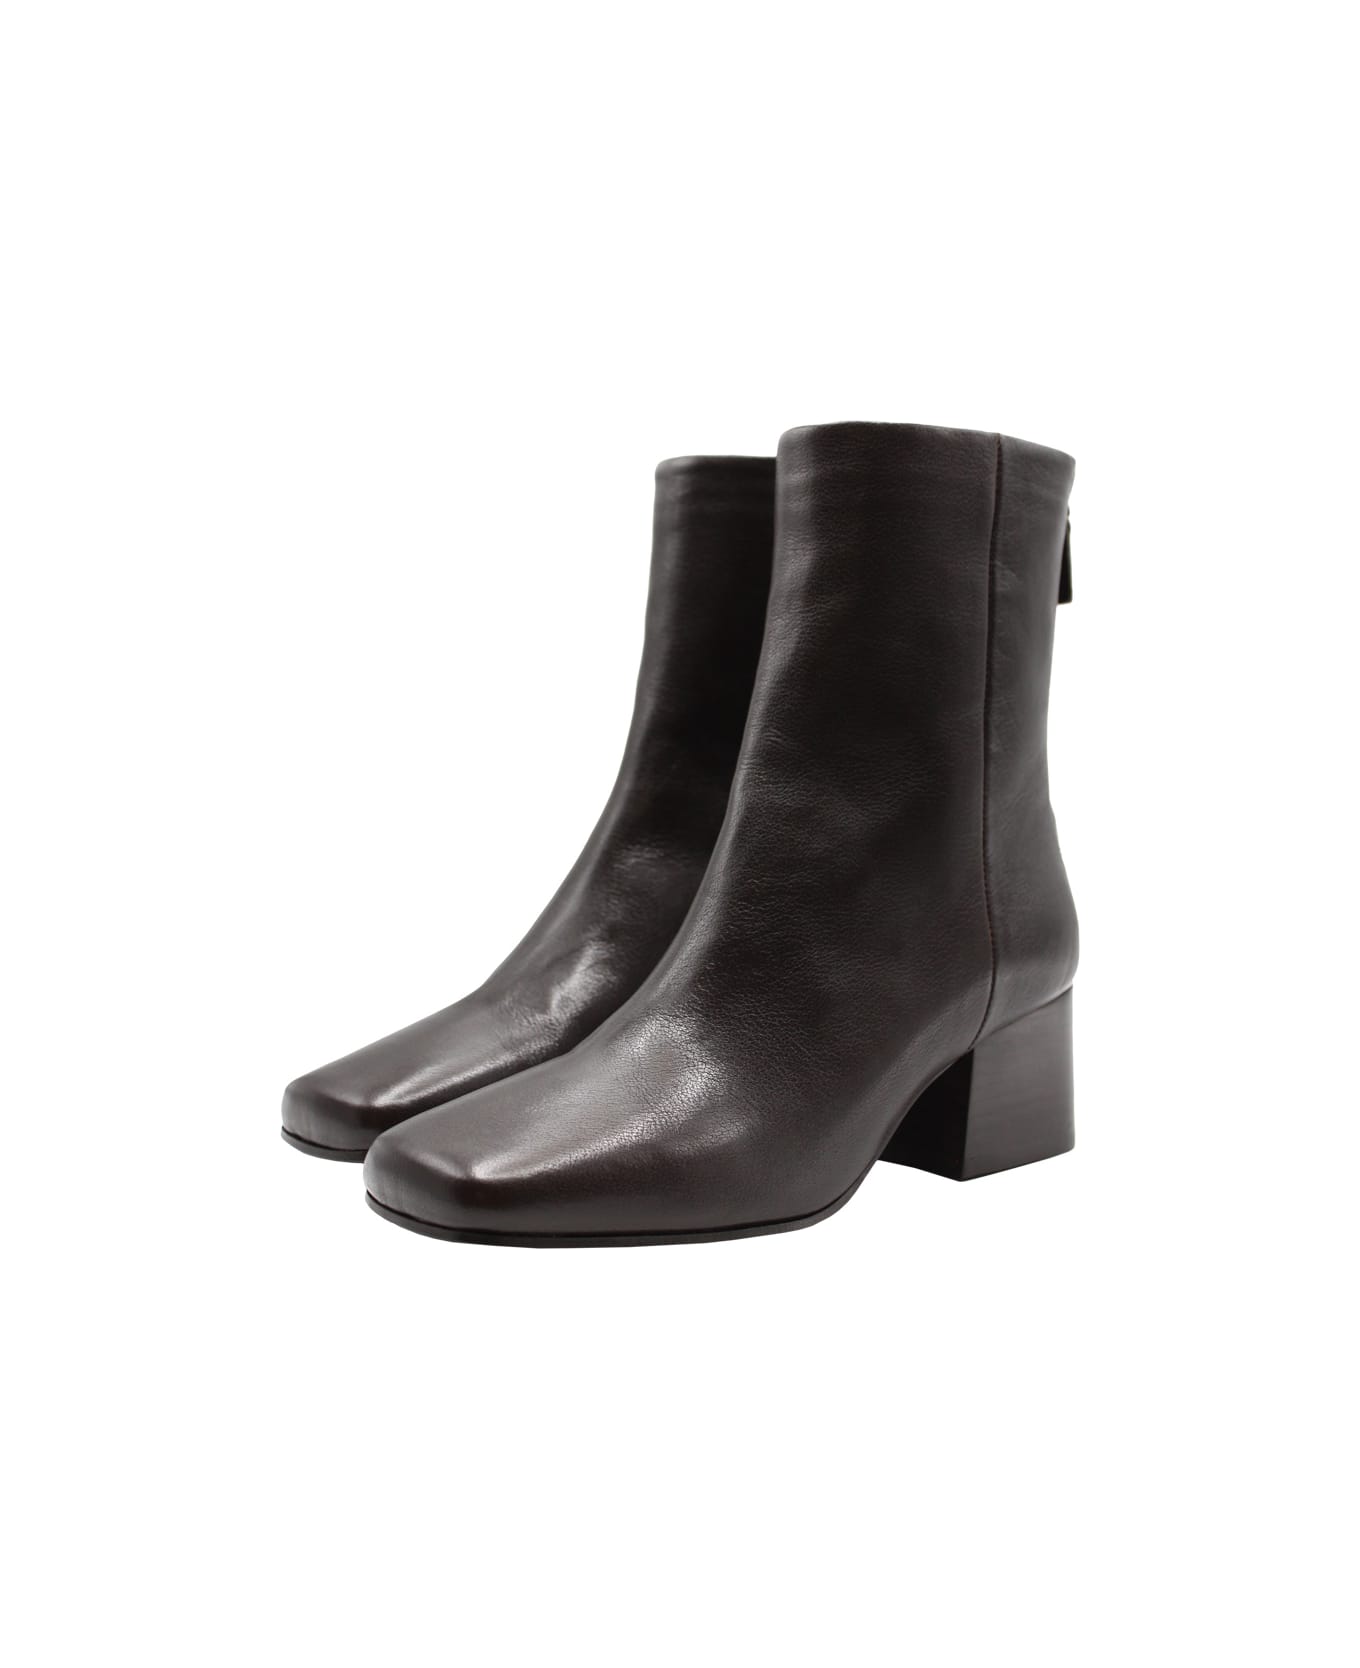 Lemaire Soft Boots 55 - Dark Chocolate ブーツ